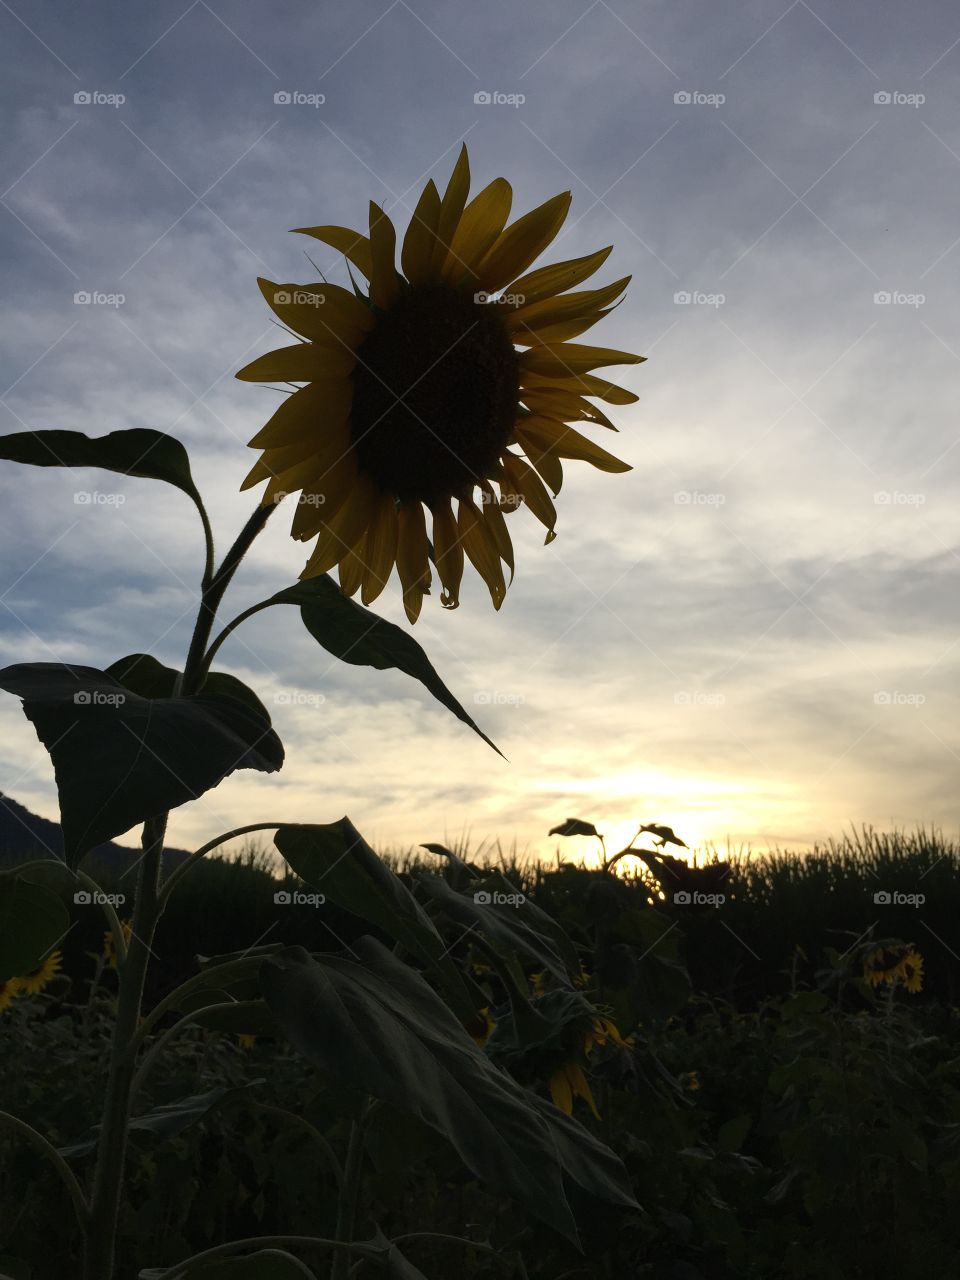 Lonely Sunflower At Dusk